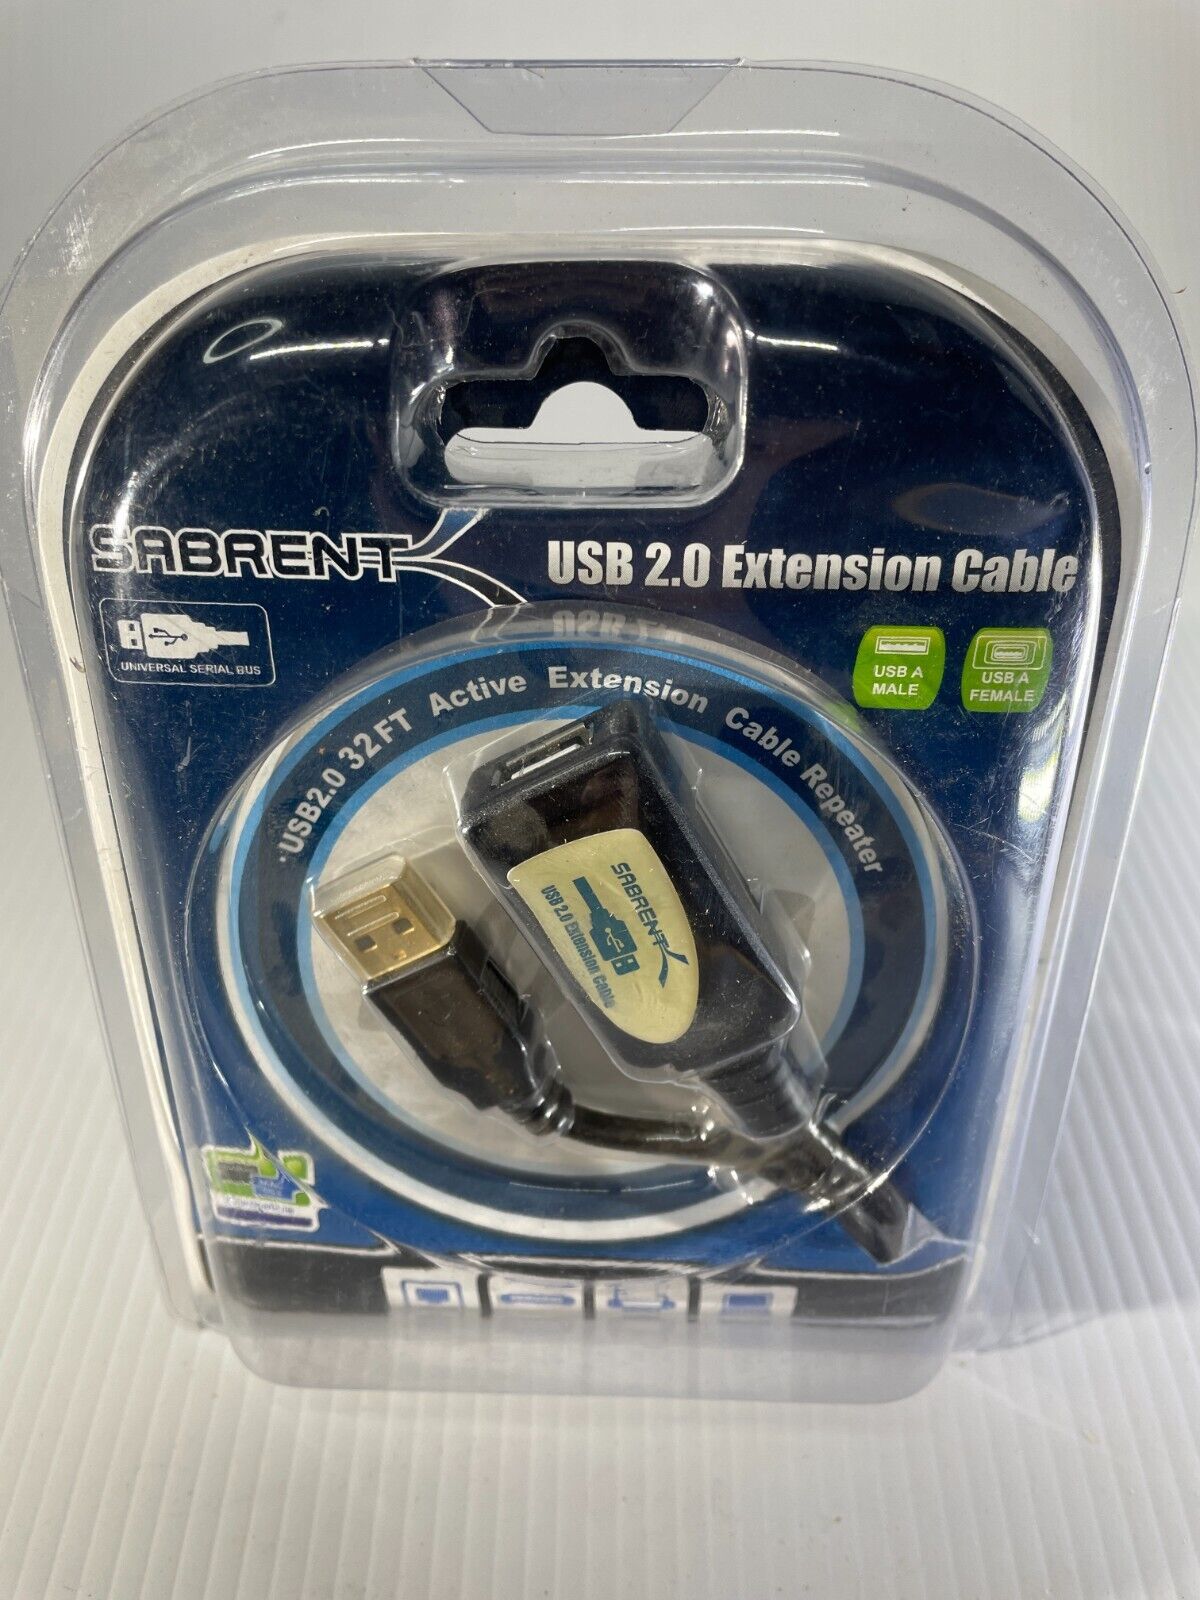 Sabrent 32-foot USB 2.0 Active Extension Cable CB-USBXT